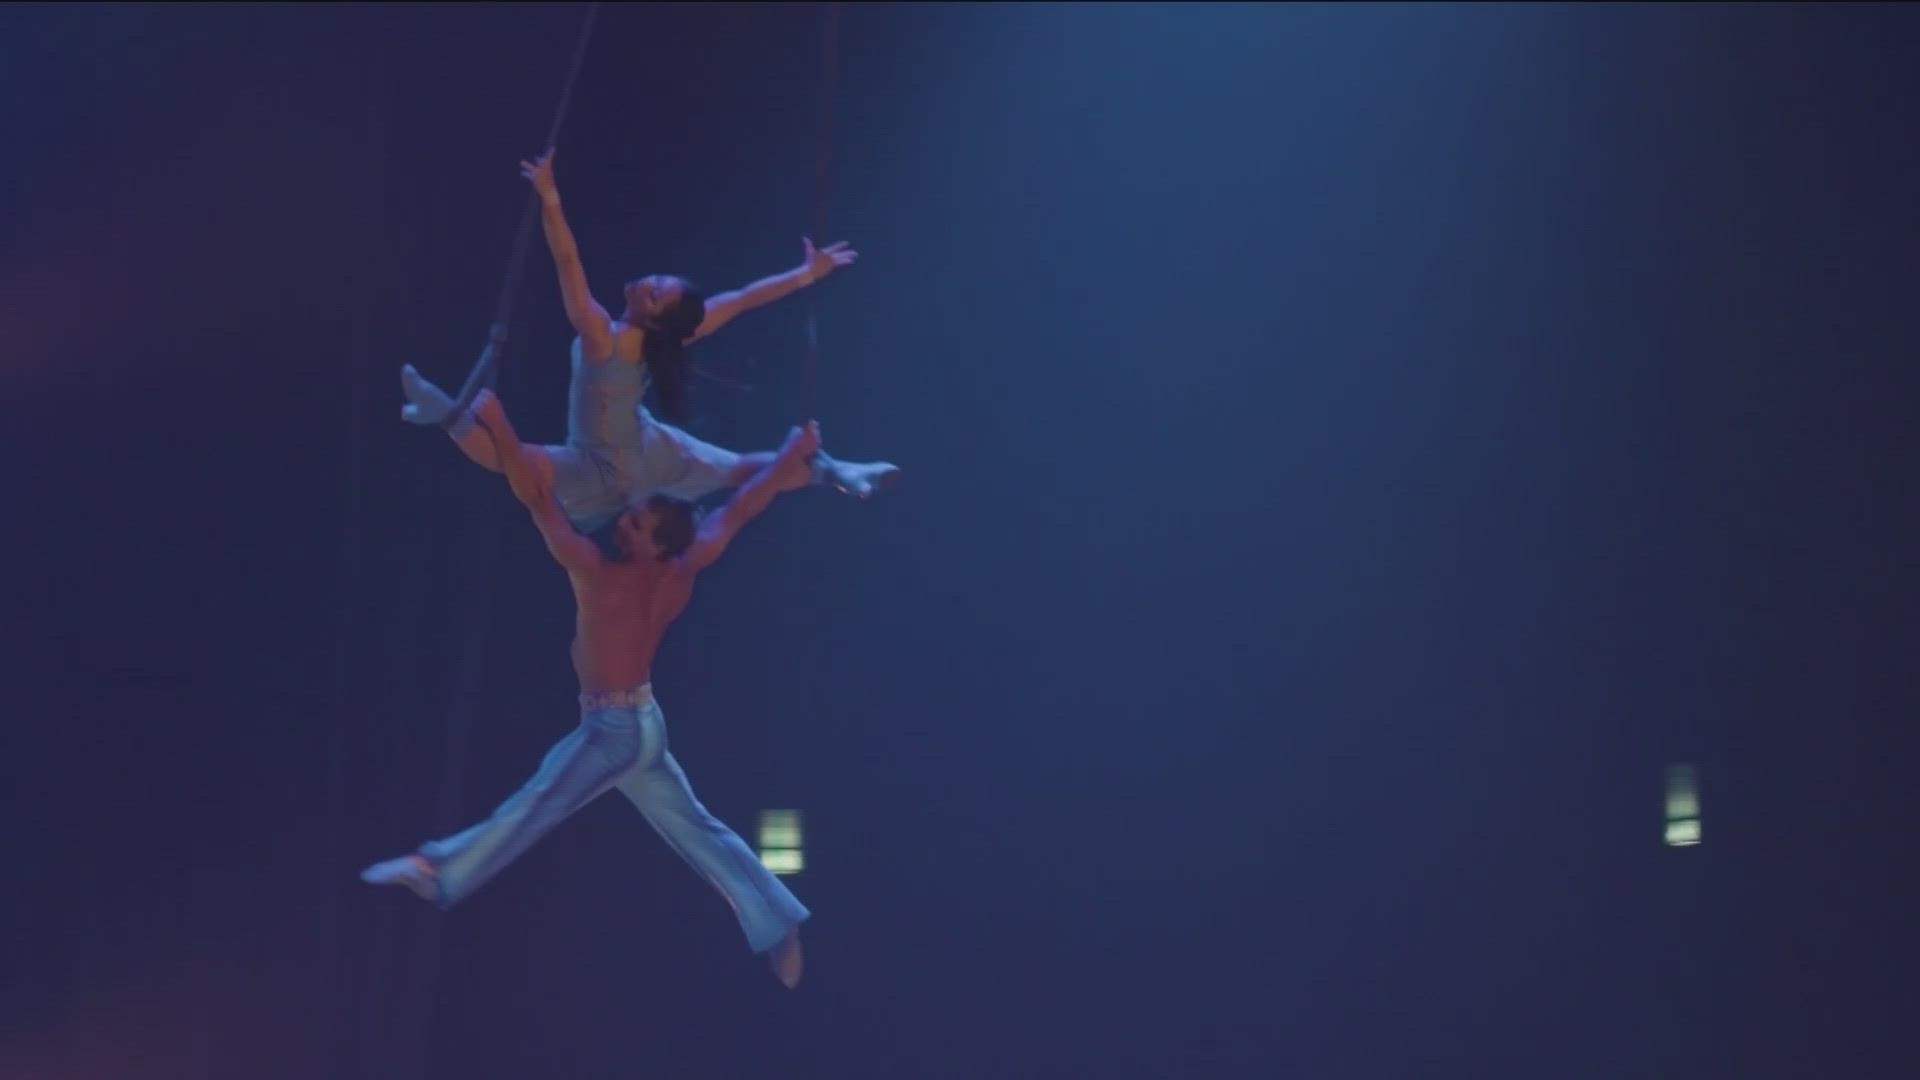 Cirque du Soleil returns to San Diego with one of its best-loved productions from Sept. 6-10 at the Pechanga Arena.